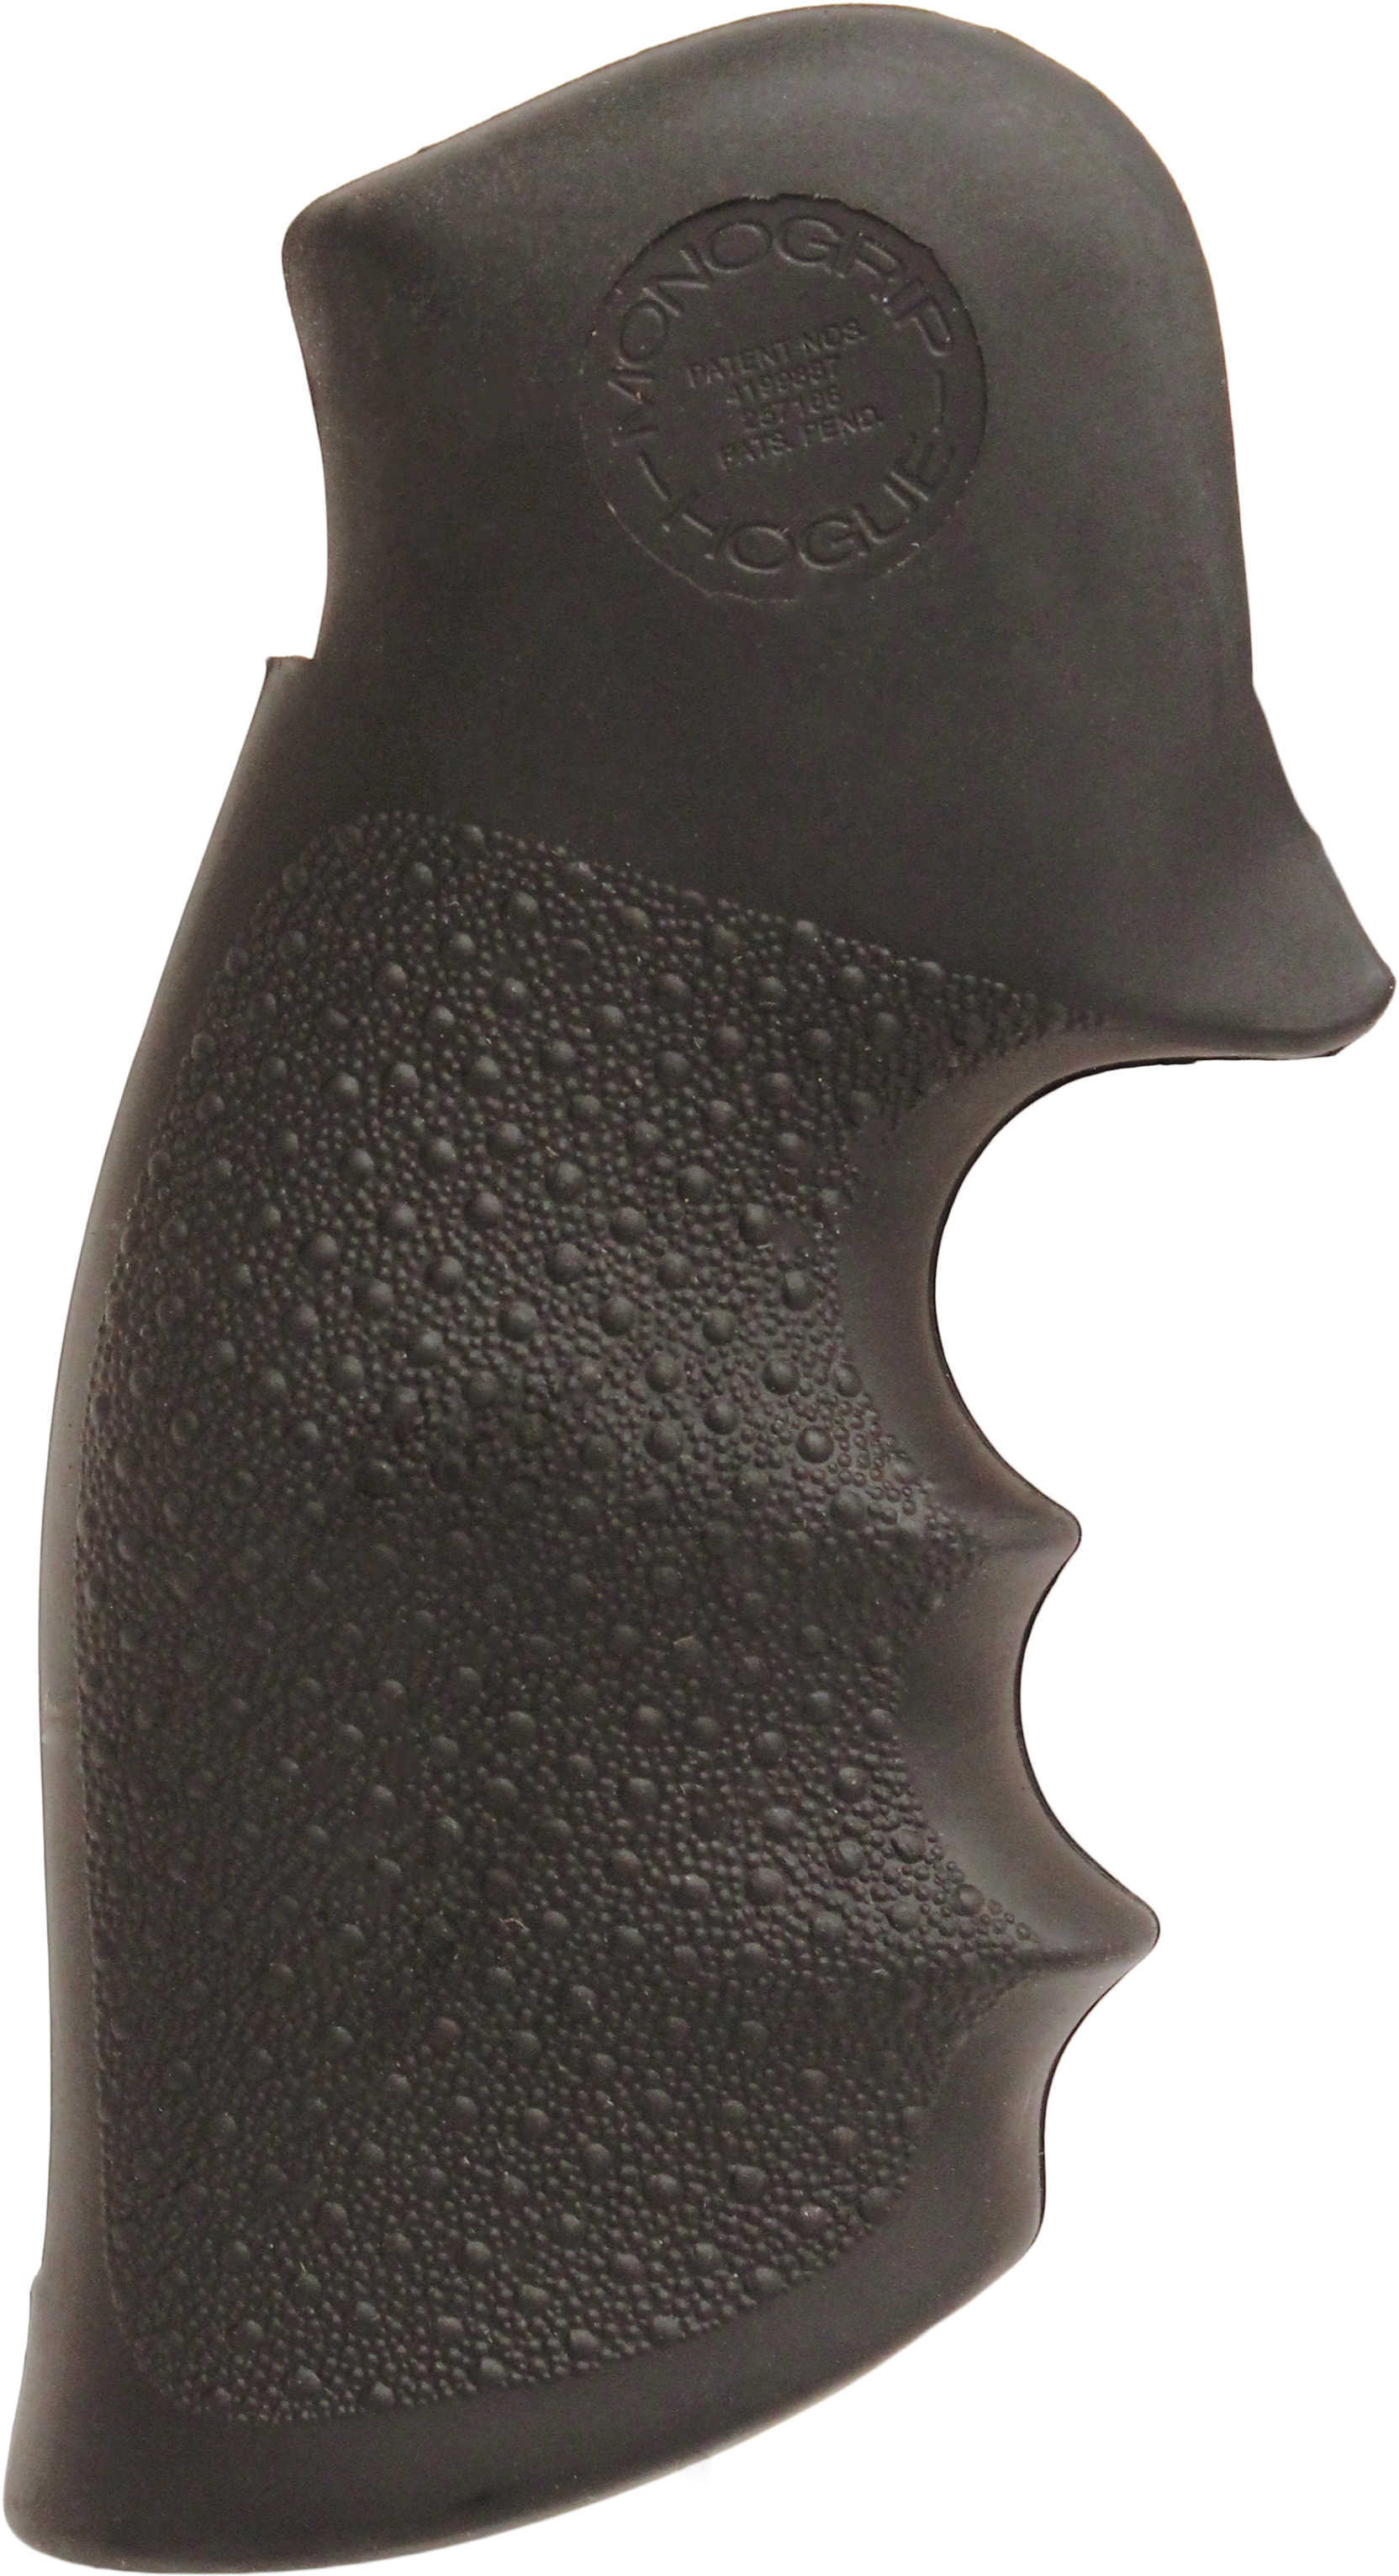 Hogue Rubber Grip With Finger Grooves Taurus Medium & Large Frame Square Butt Durable Synthetic Cobblestone